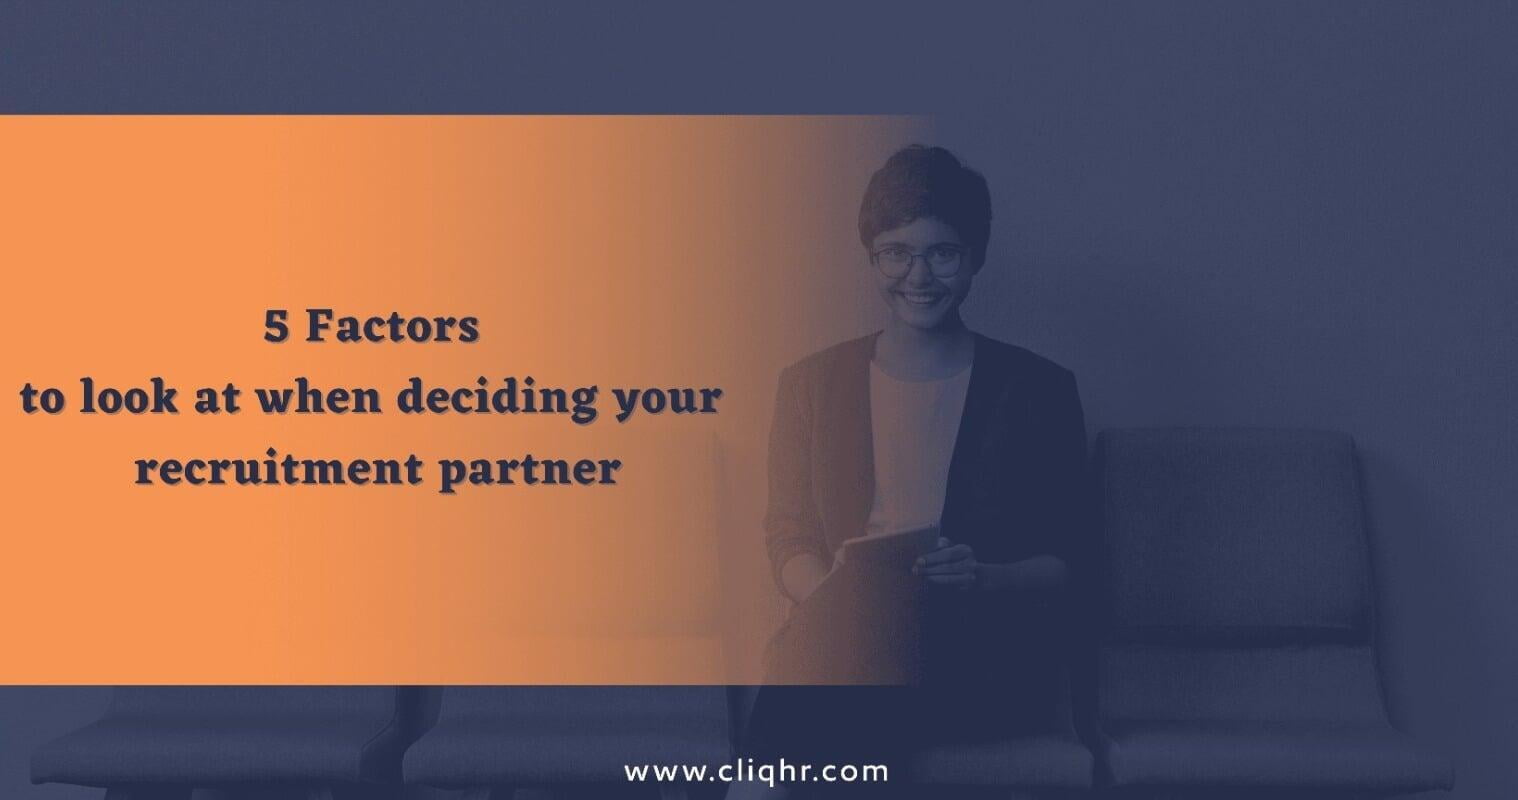 5 Factors to look at when deciding your recruitment partner